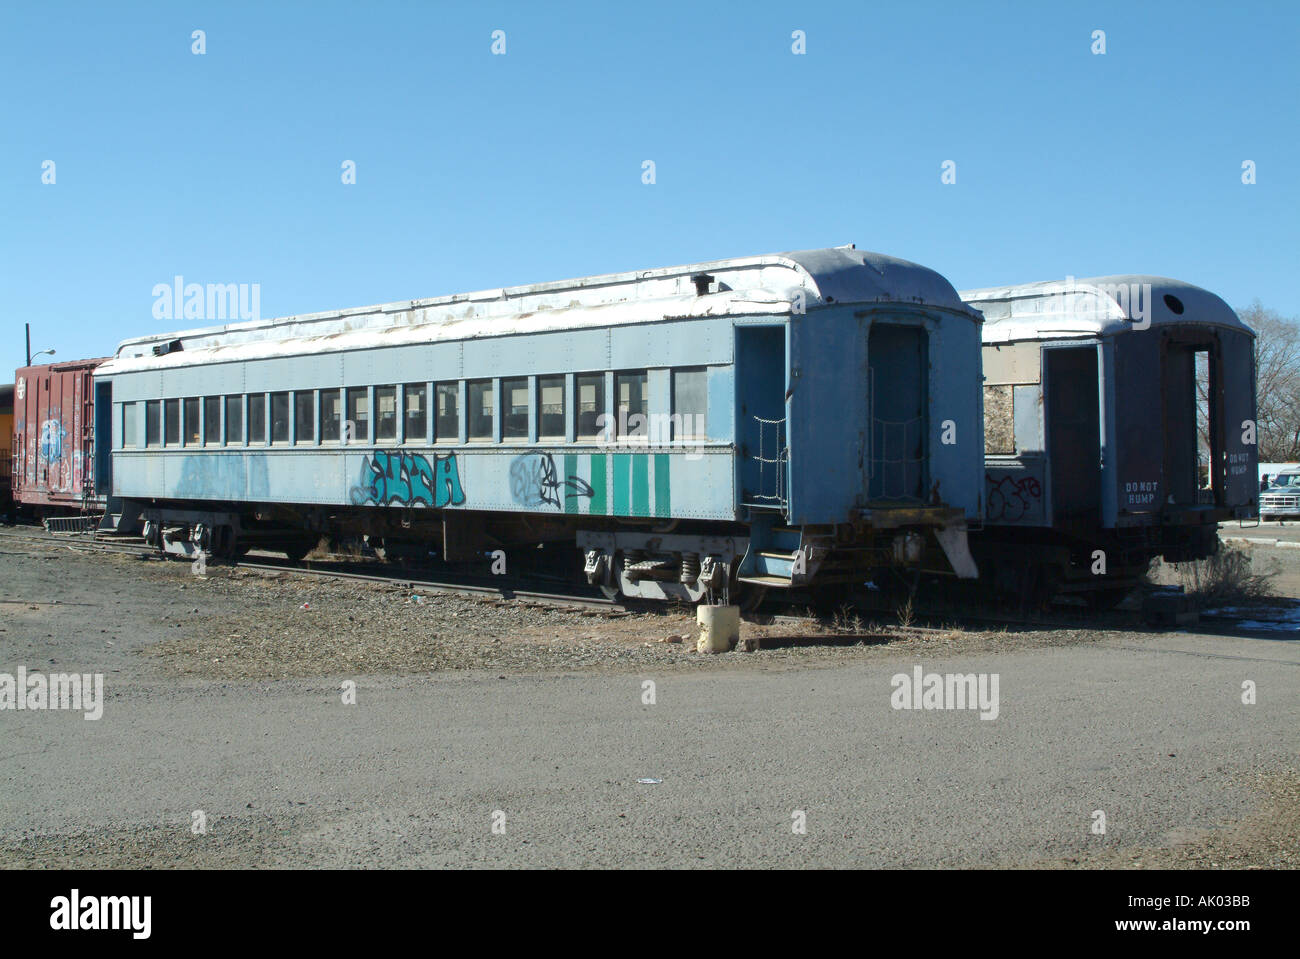 Old Railroad Carriages on Southern Santa Fe Railway New Mexico United States America USA Stock Photo